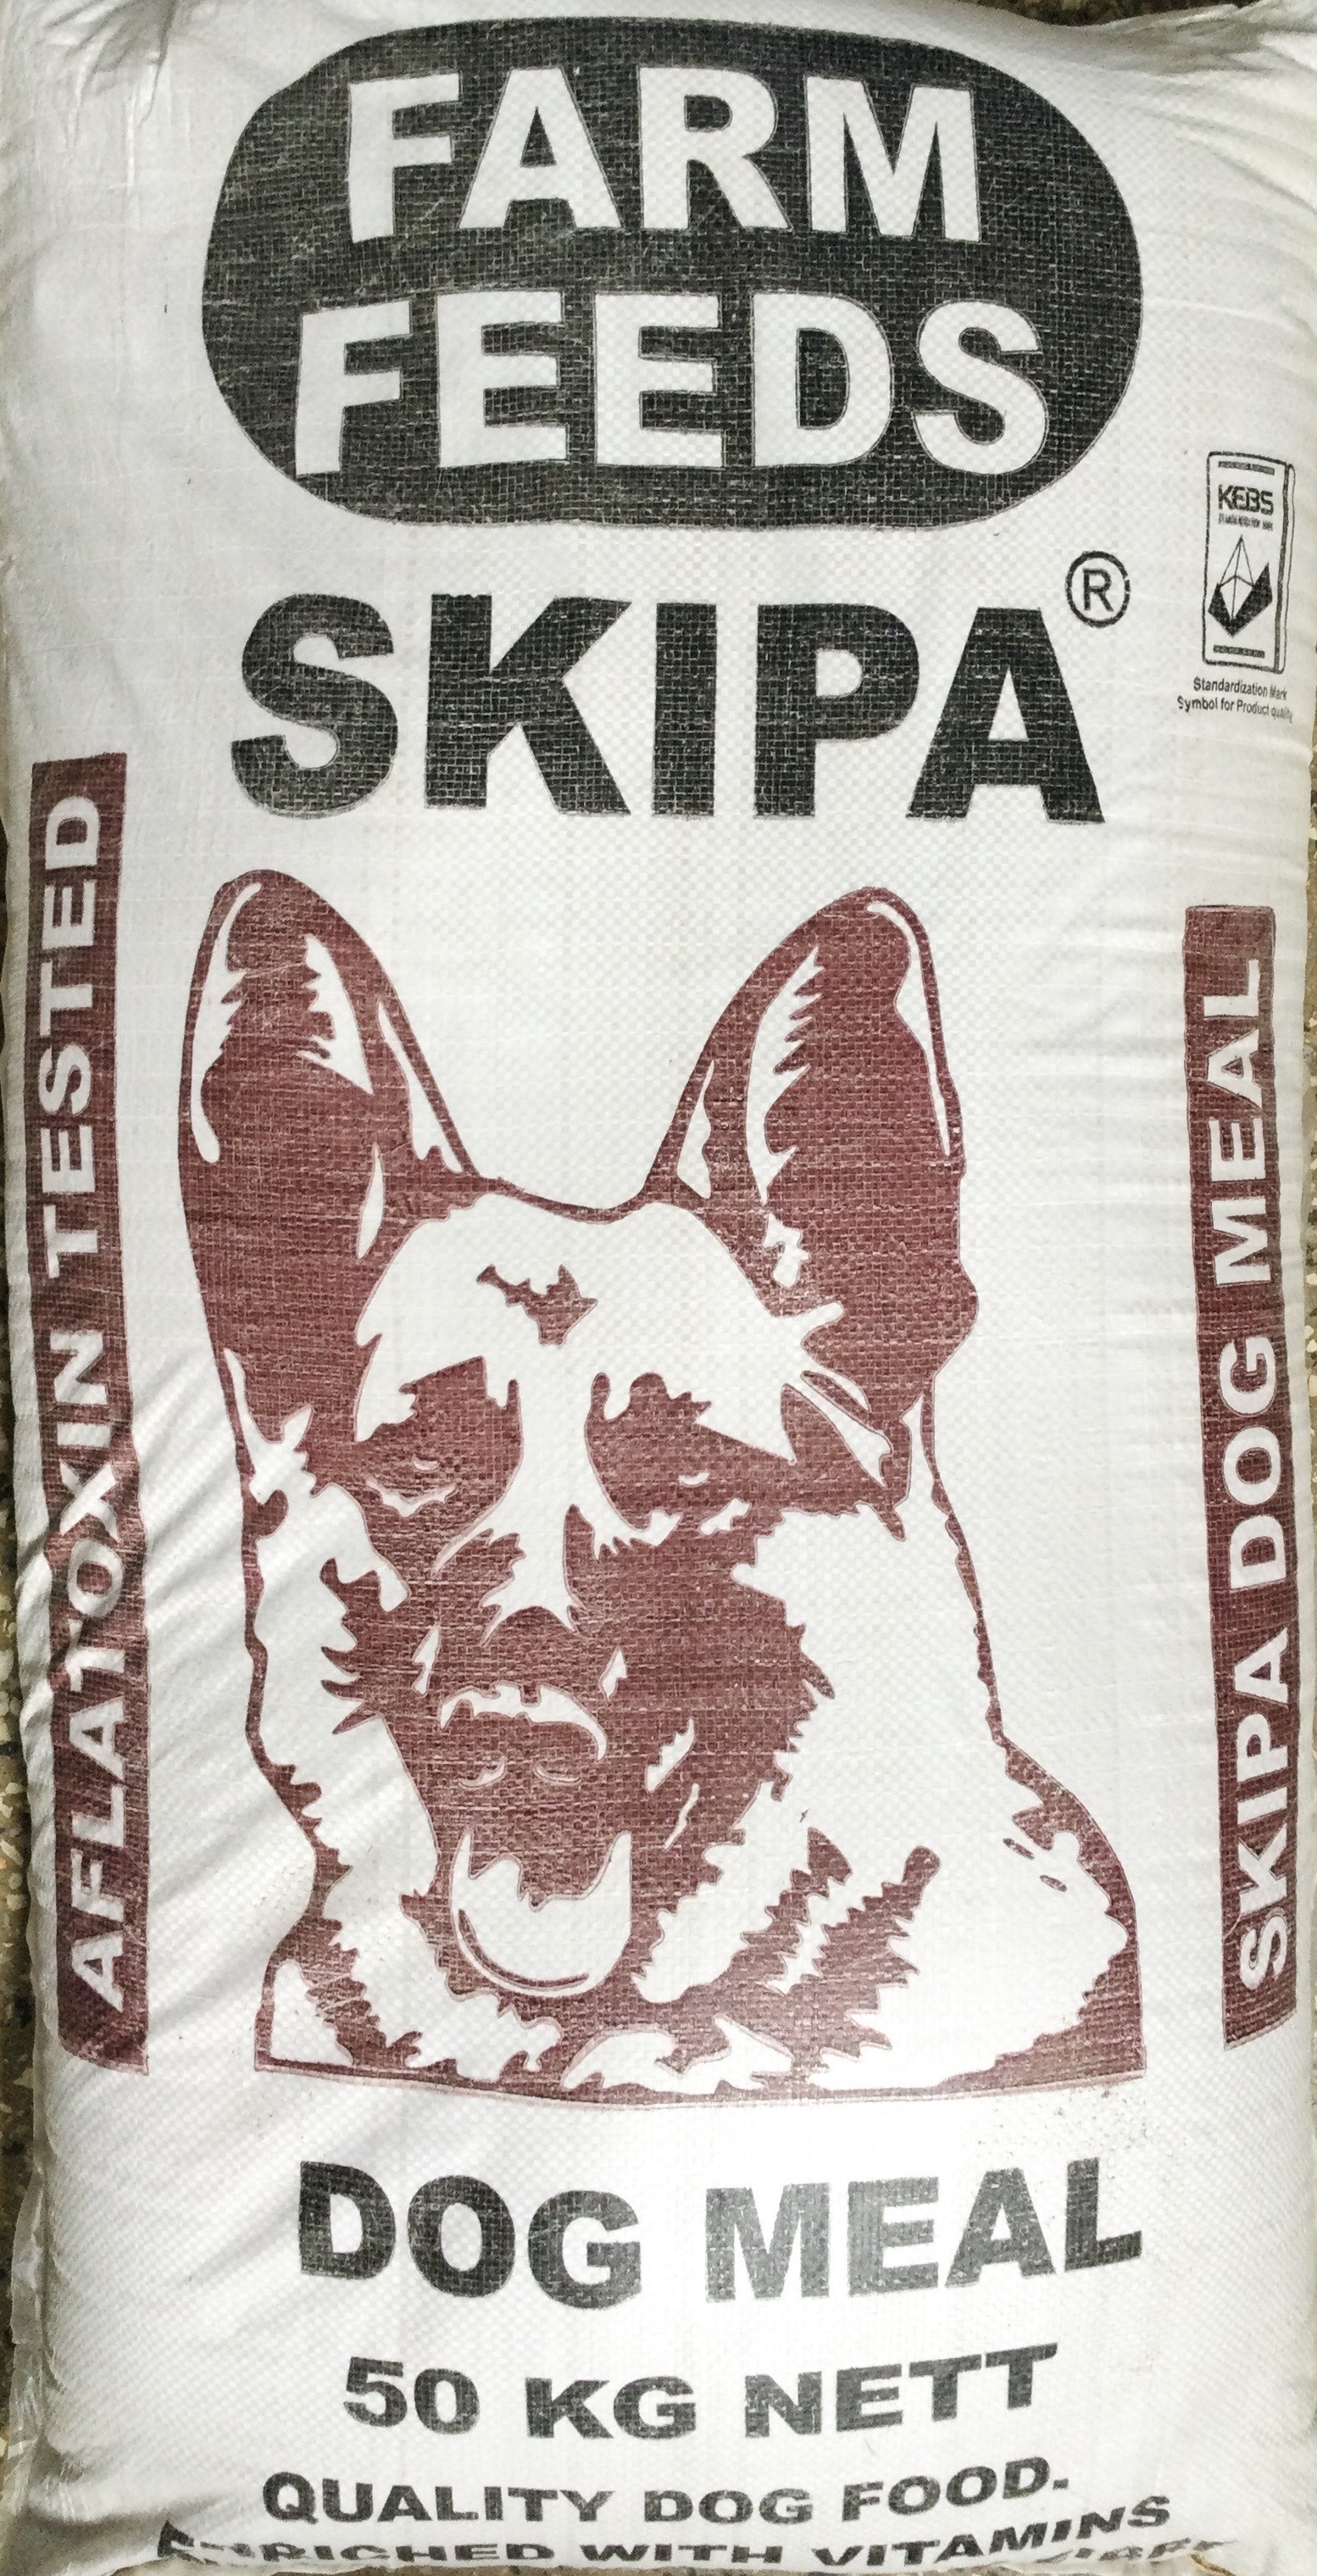 This is a high quality aflatoxin-free, uncooked, dry meal for all ages and breeds of dogs.
It contains high specifications of energy and proteins, sterelized meat and bone meal for all ages and breeds of dogs.
Contains high levels of calcium and phosphorus for the development of strong bones, and robust body health. Contains toxin binders to ensure it is free of mycotoxins